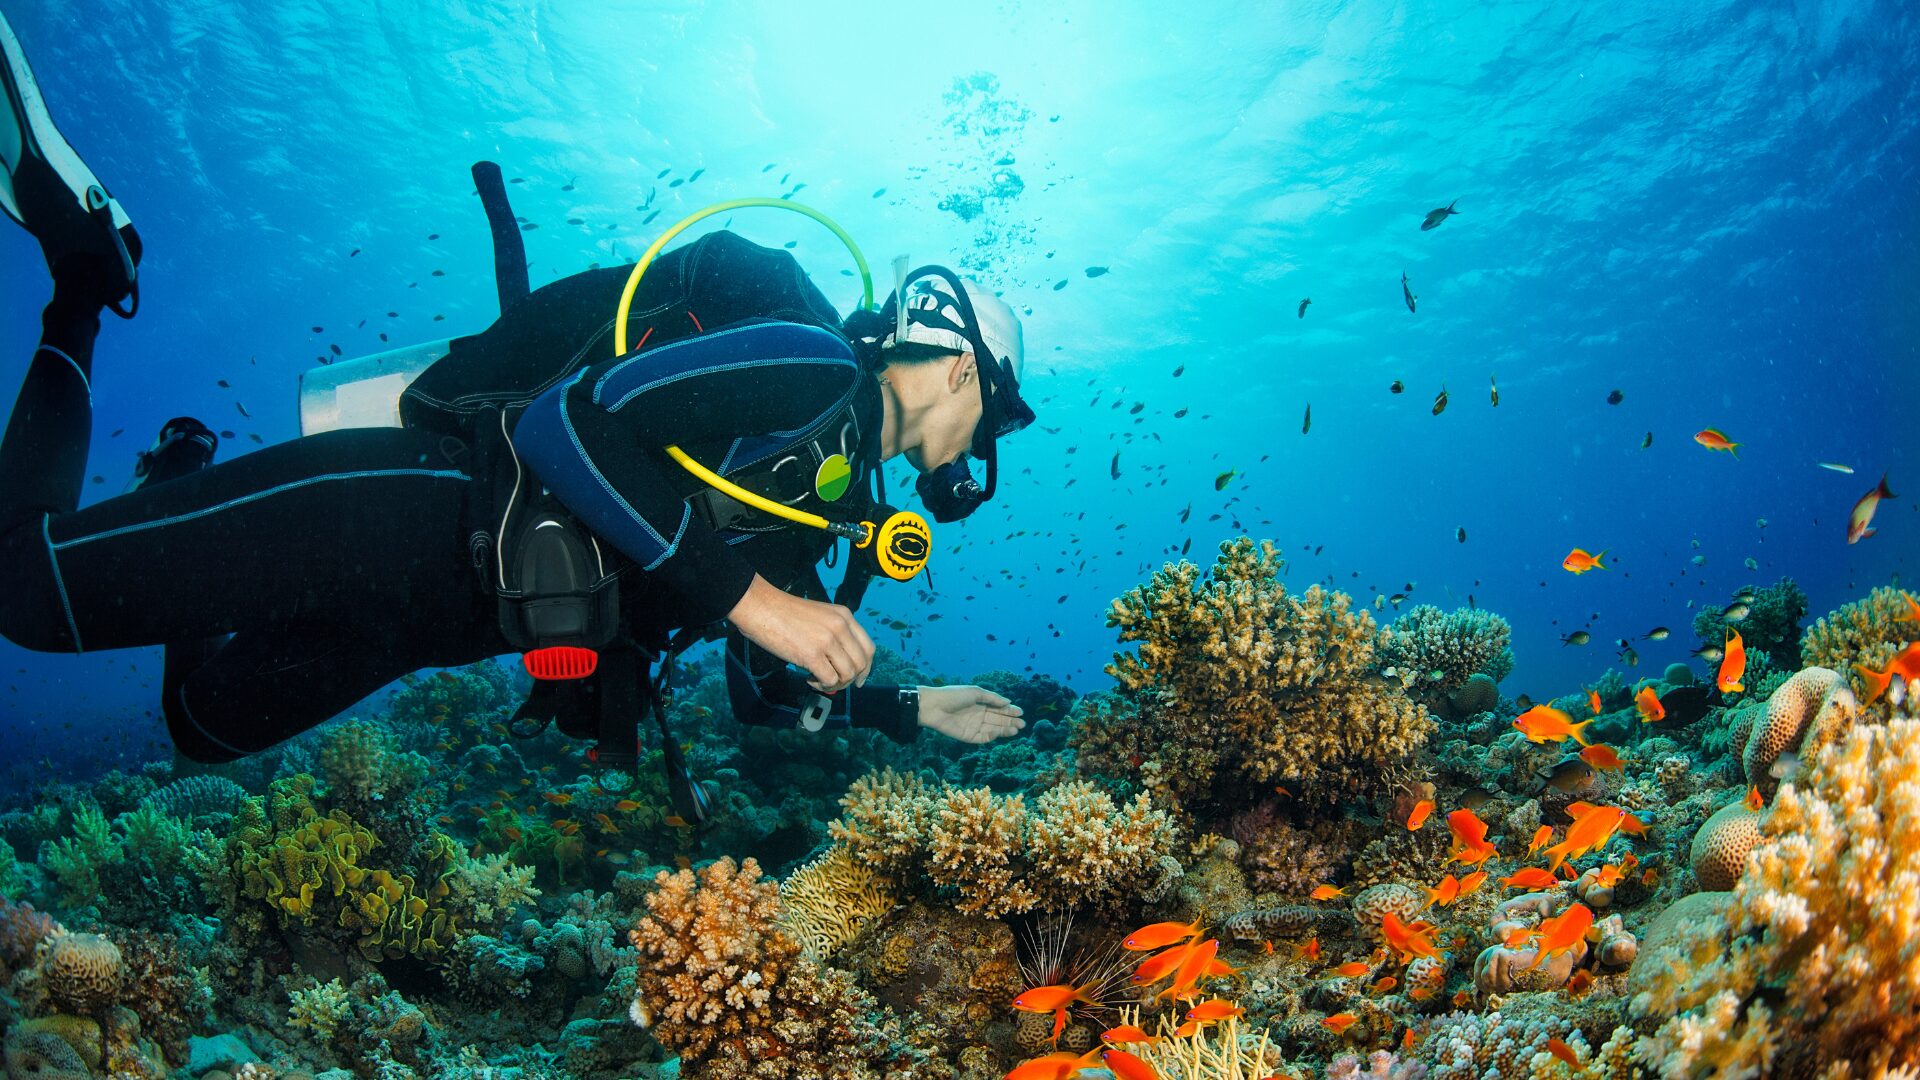 A person scuba diving at the bottom of the sea with small fish swimming around.